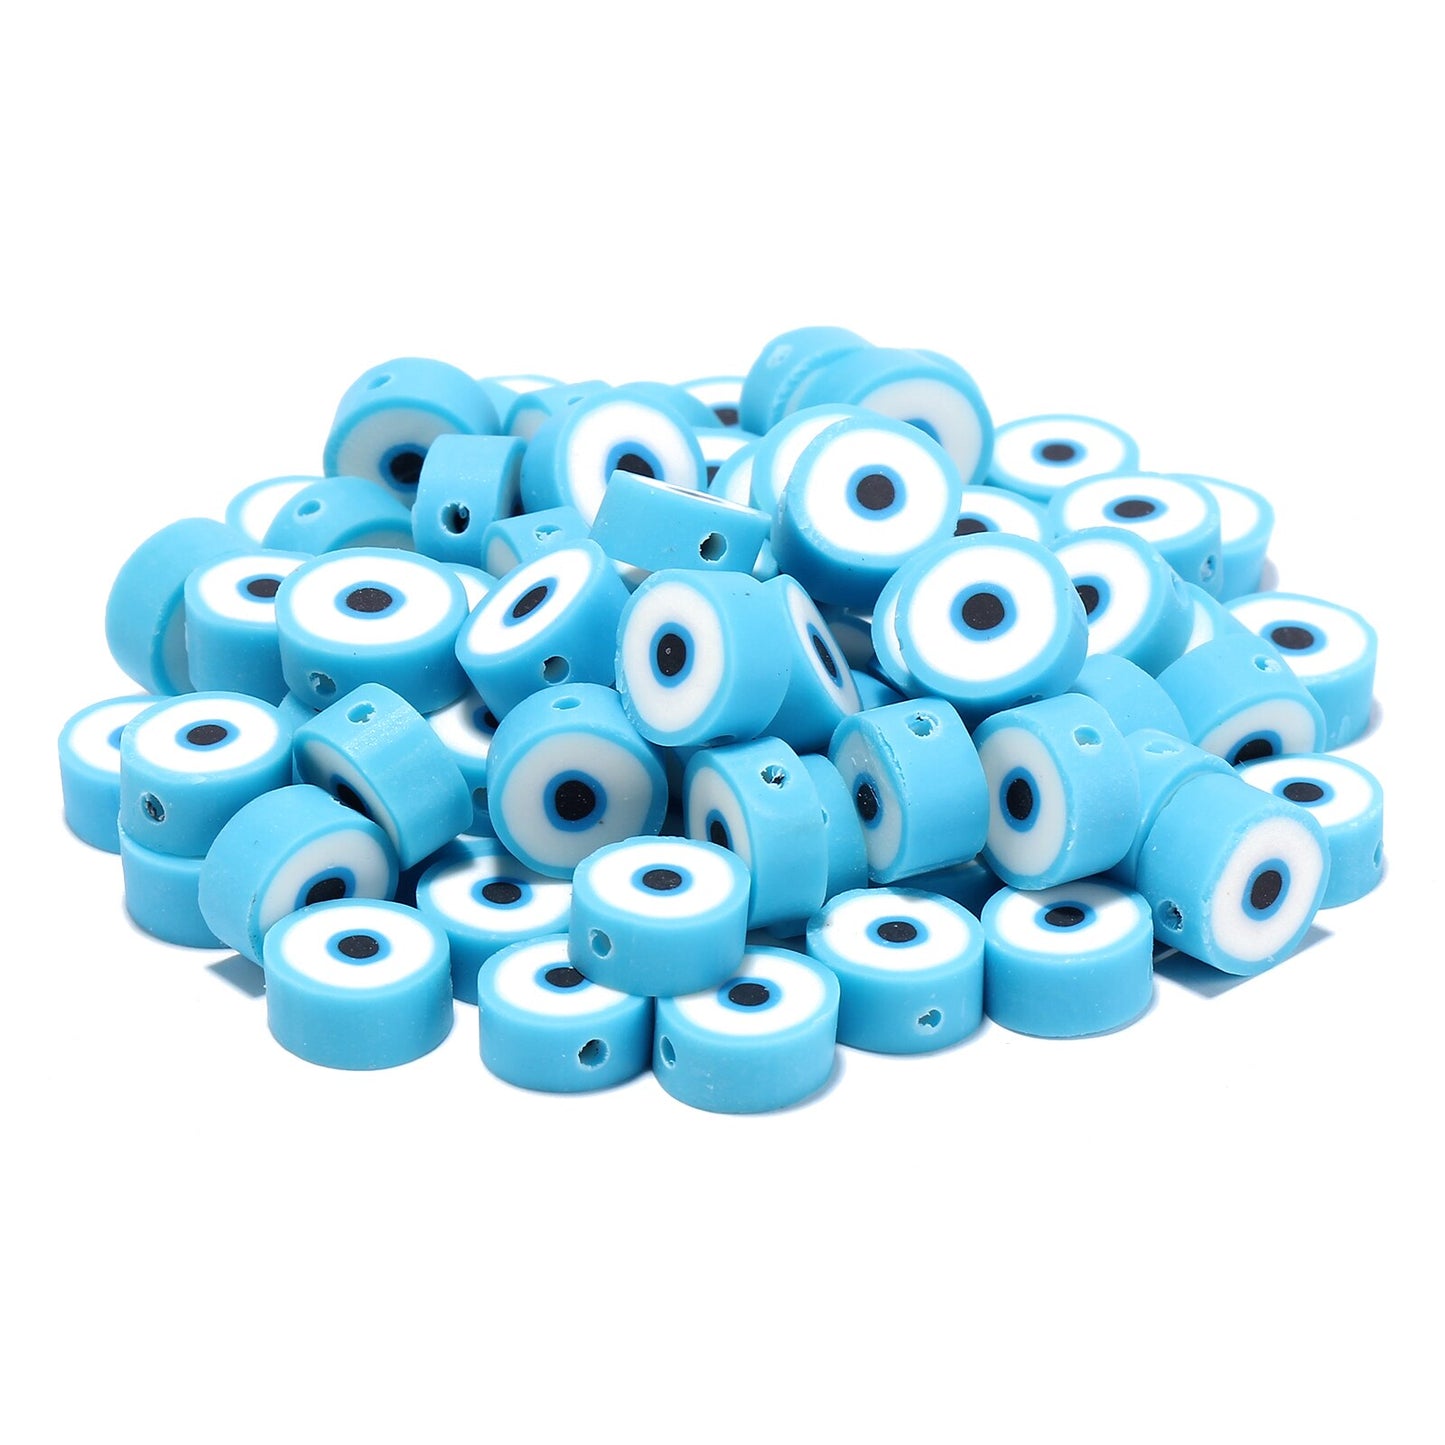 50pcs/lot Cartoon Flowers Evil Eye Polymer Clay Spacer Beads for Women Girls Jewelry Making DIY Bracelet Necklace  Accessories